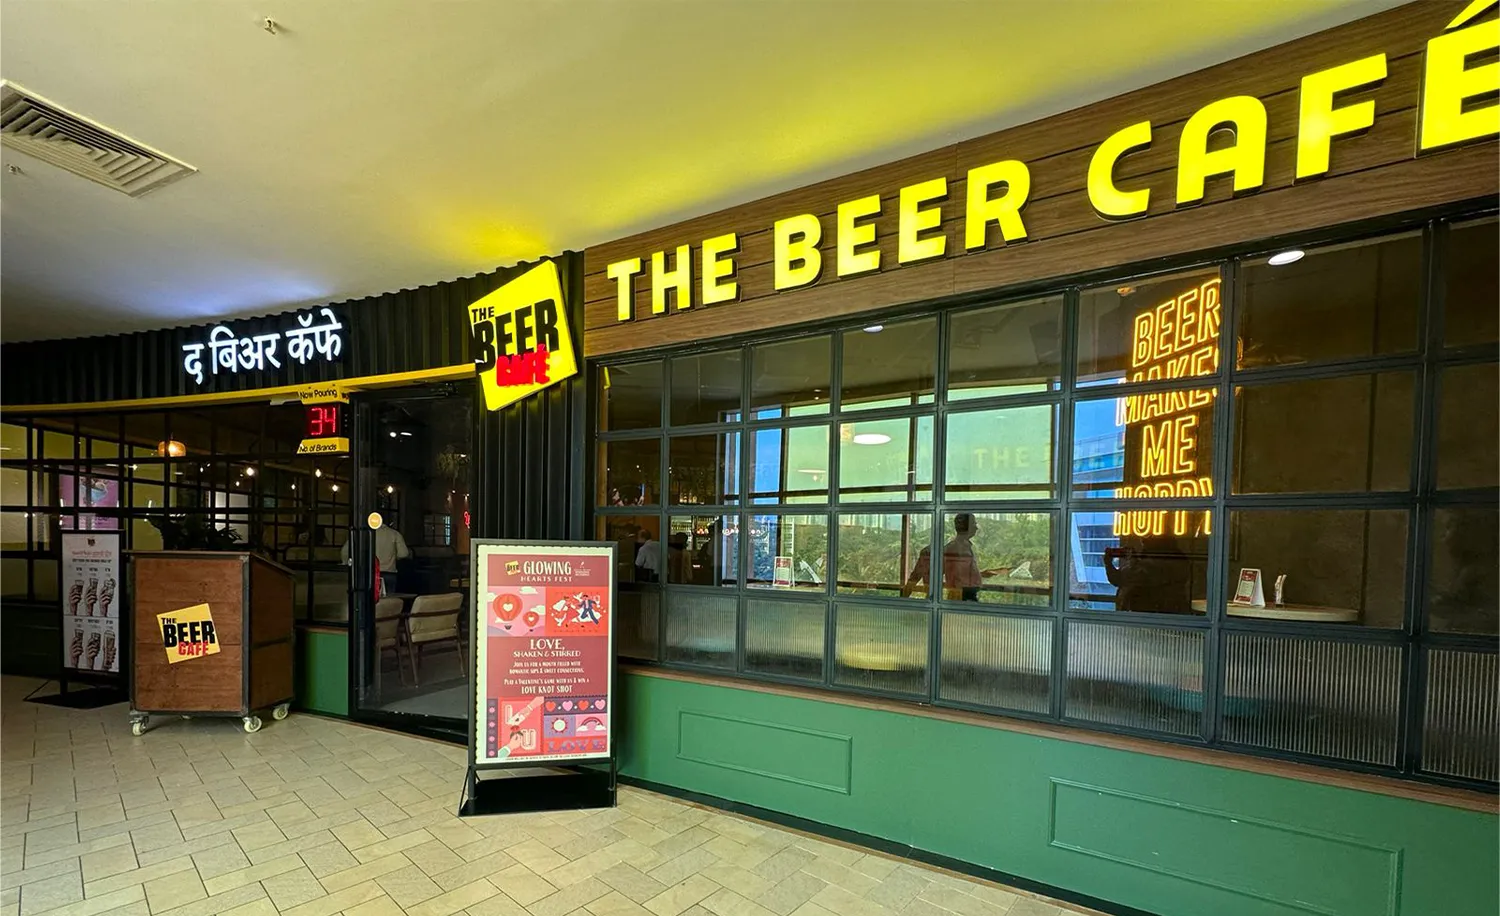 The Beer Café’s outlet in Growel’s 101 Mall